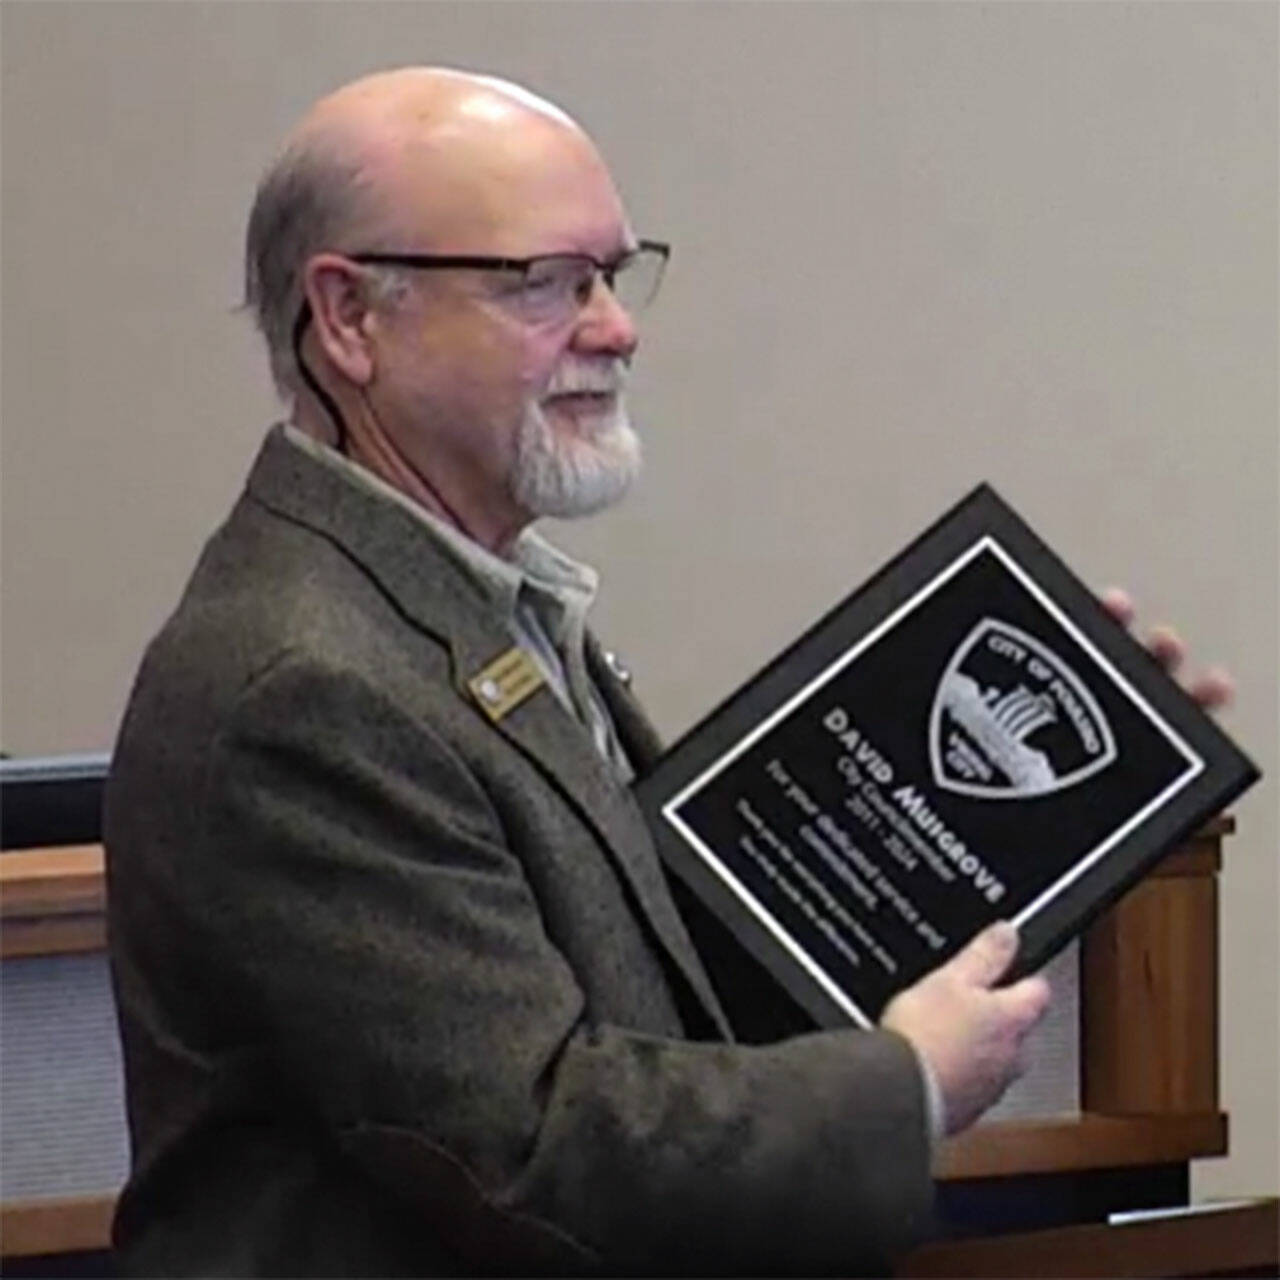 City of Poulsbo courtesy photos
Outgoing councilmember David Musgrove receives a plaque from the city at his last meeting March 20.